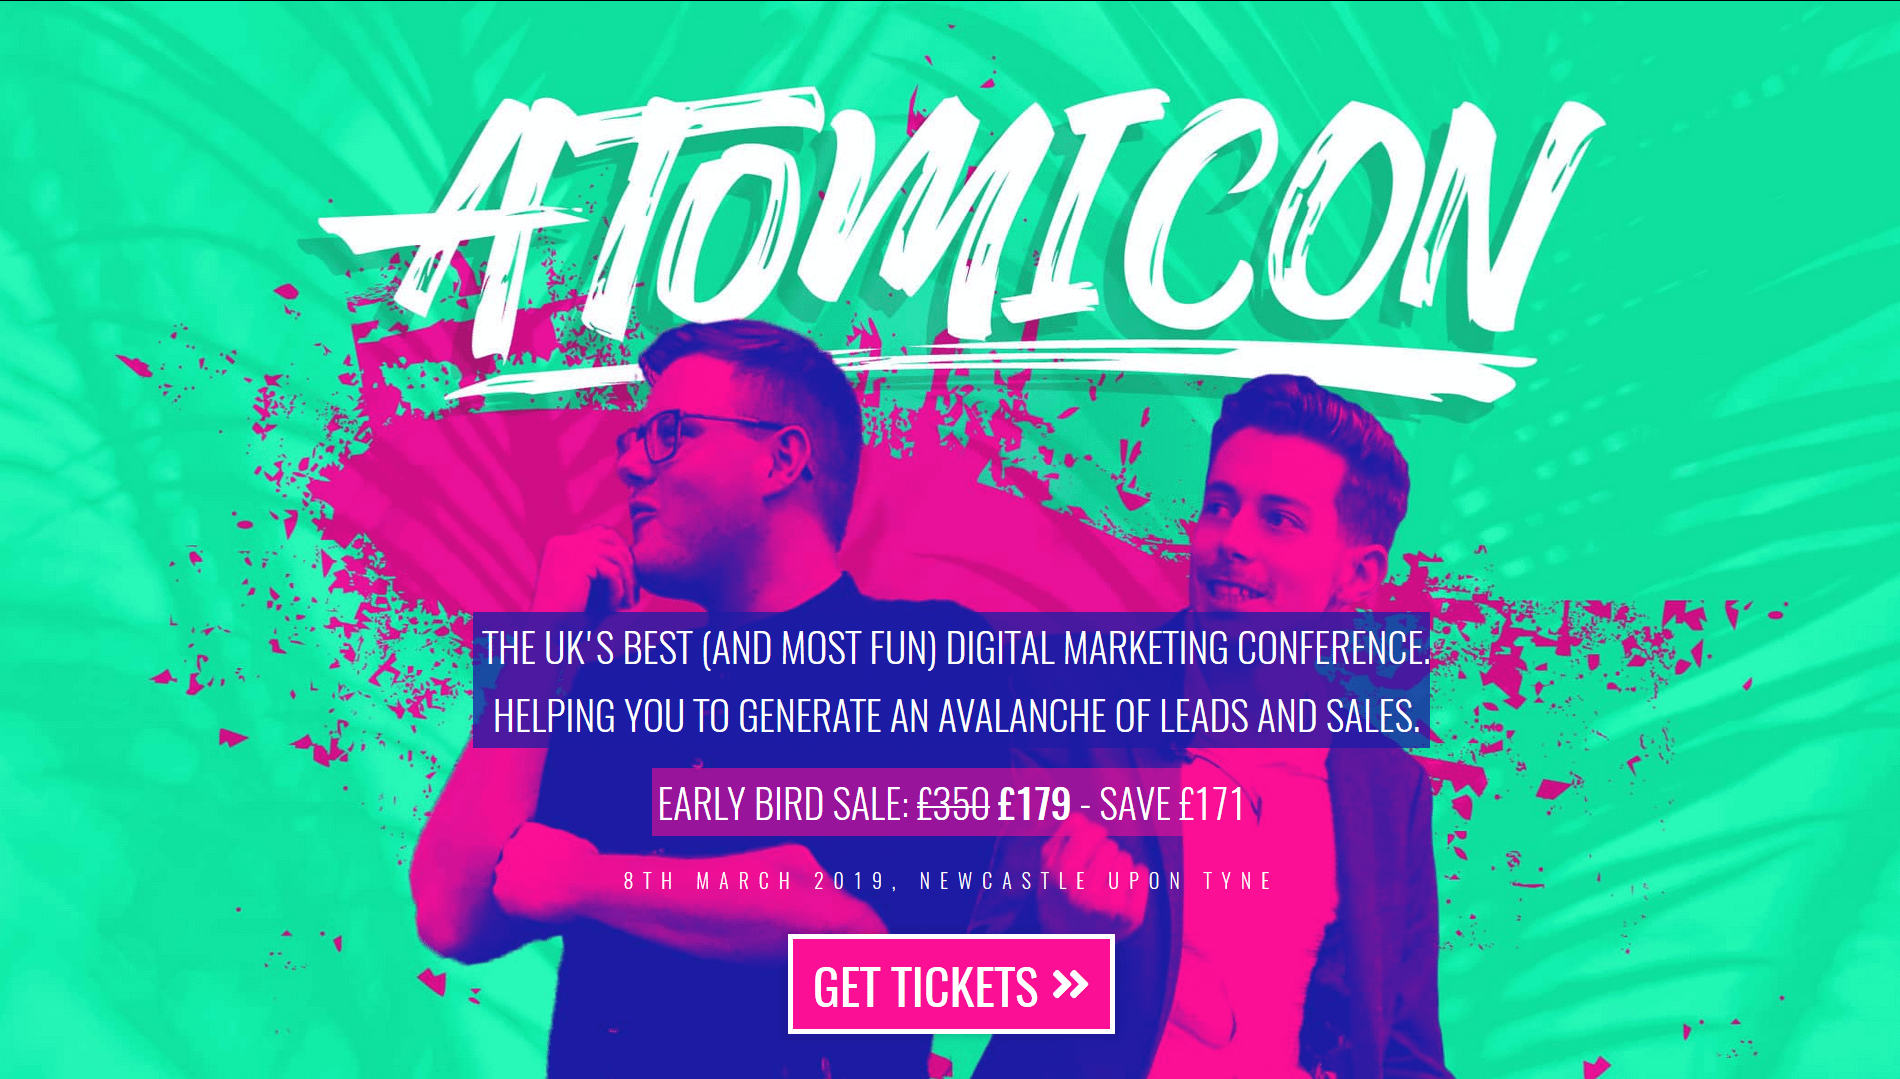 Atomicon is a playful social media conference in Newcastle, UK